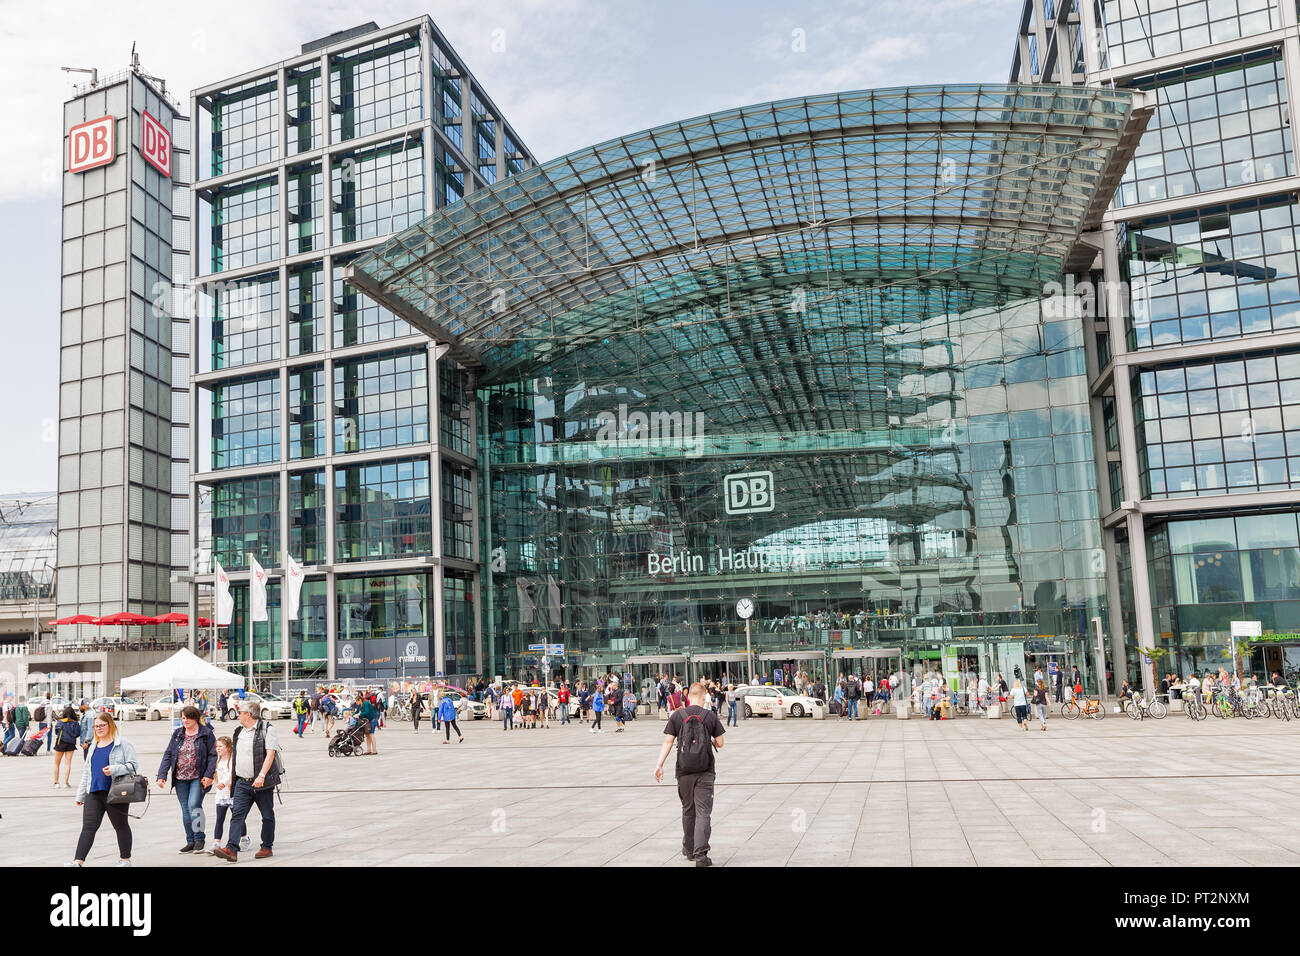 BERLIN, GERMANY - JULY 13, 2018: Facade view of Berlin Central Railway Station square or Berlin Hauptbahnhof, Hbf. Station was opened in May 2006, ope Stock Photo